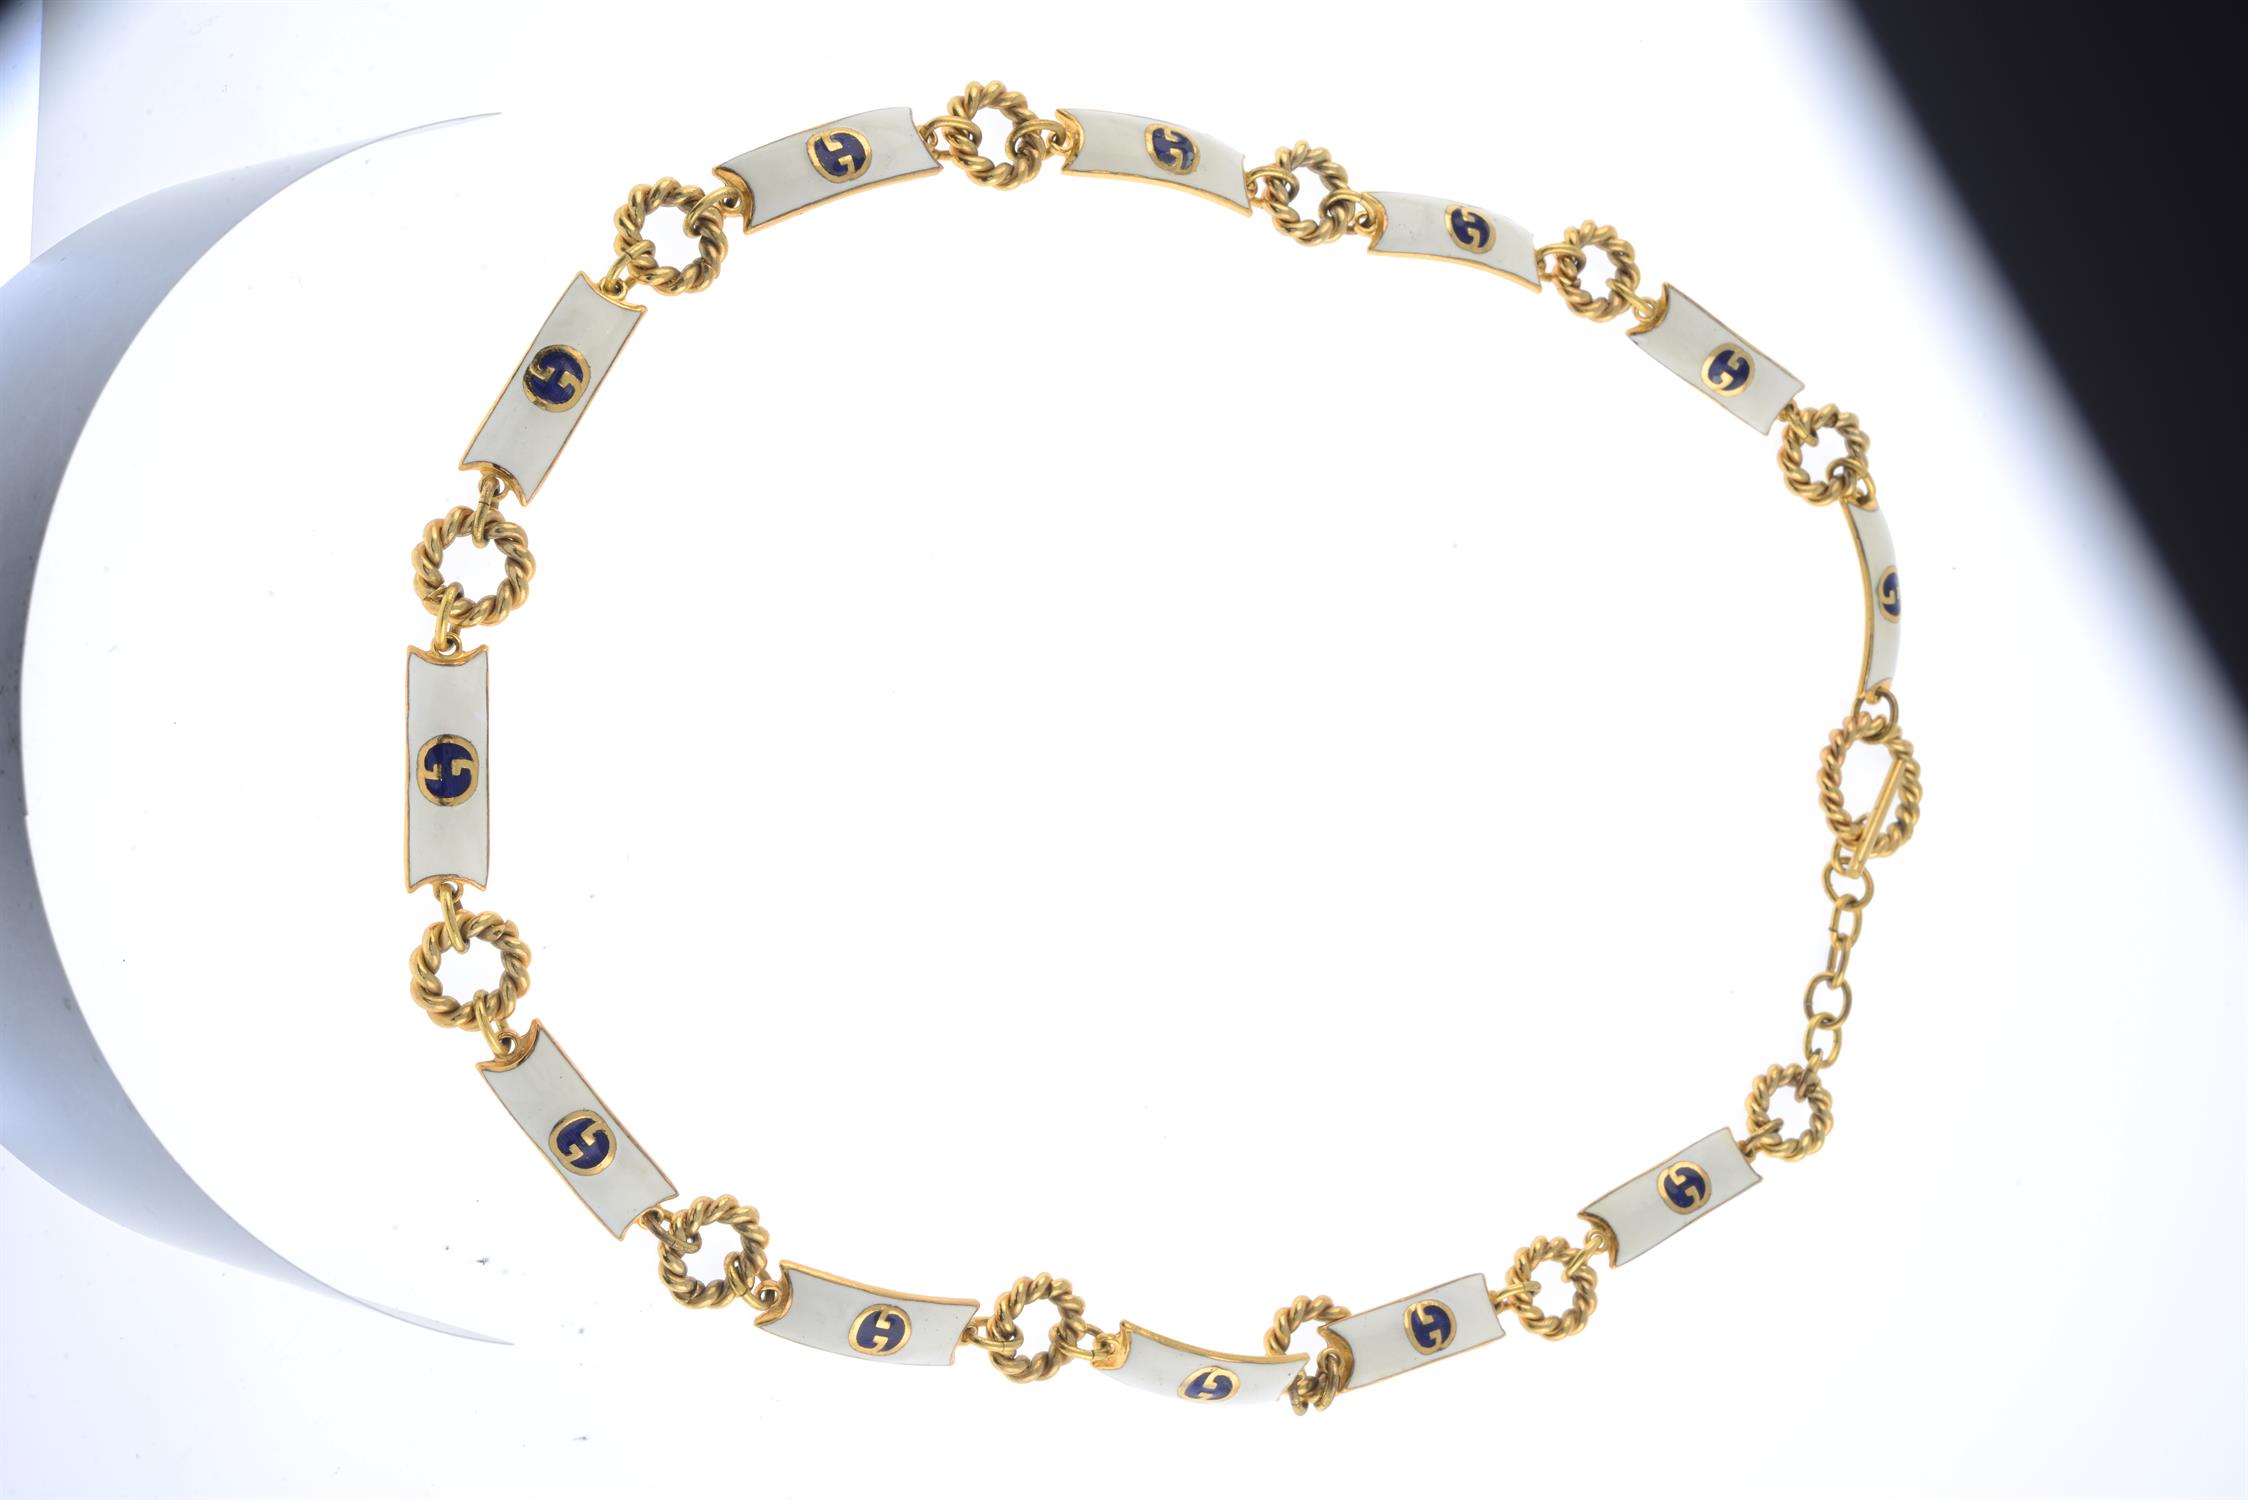 Gucci - necklace. - Image 2 of 3